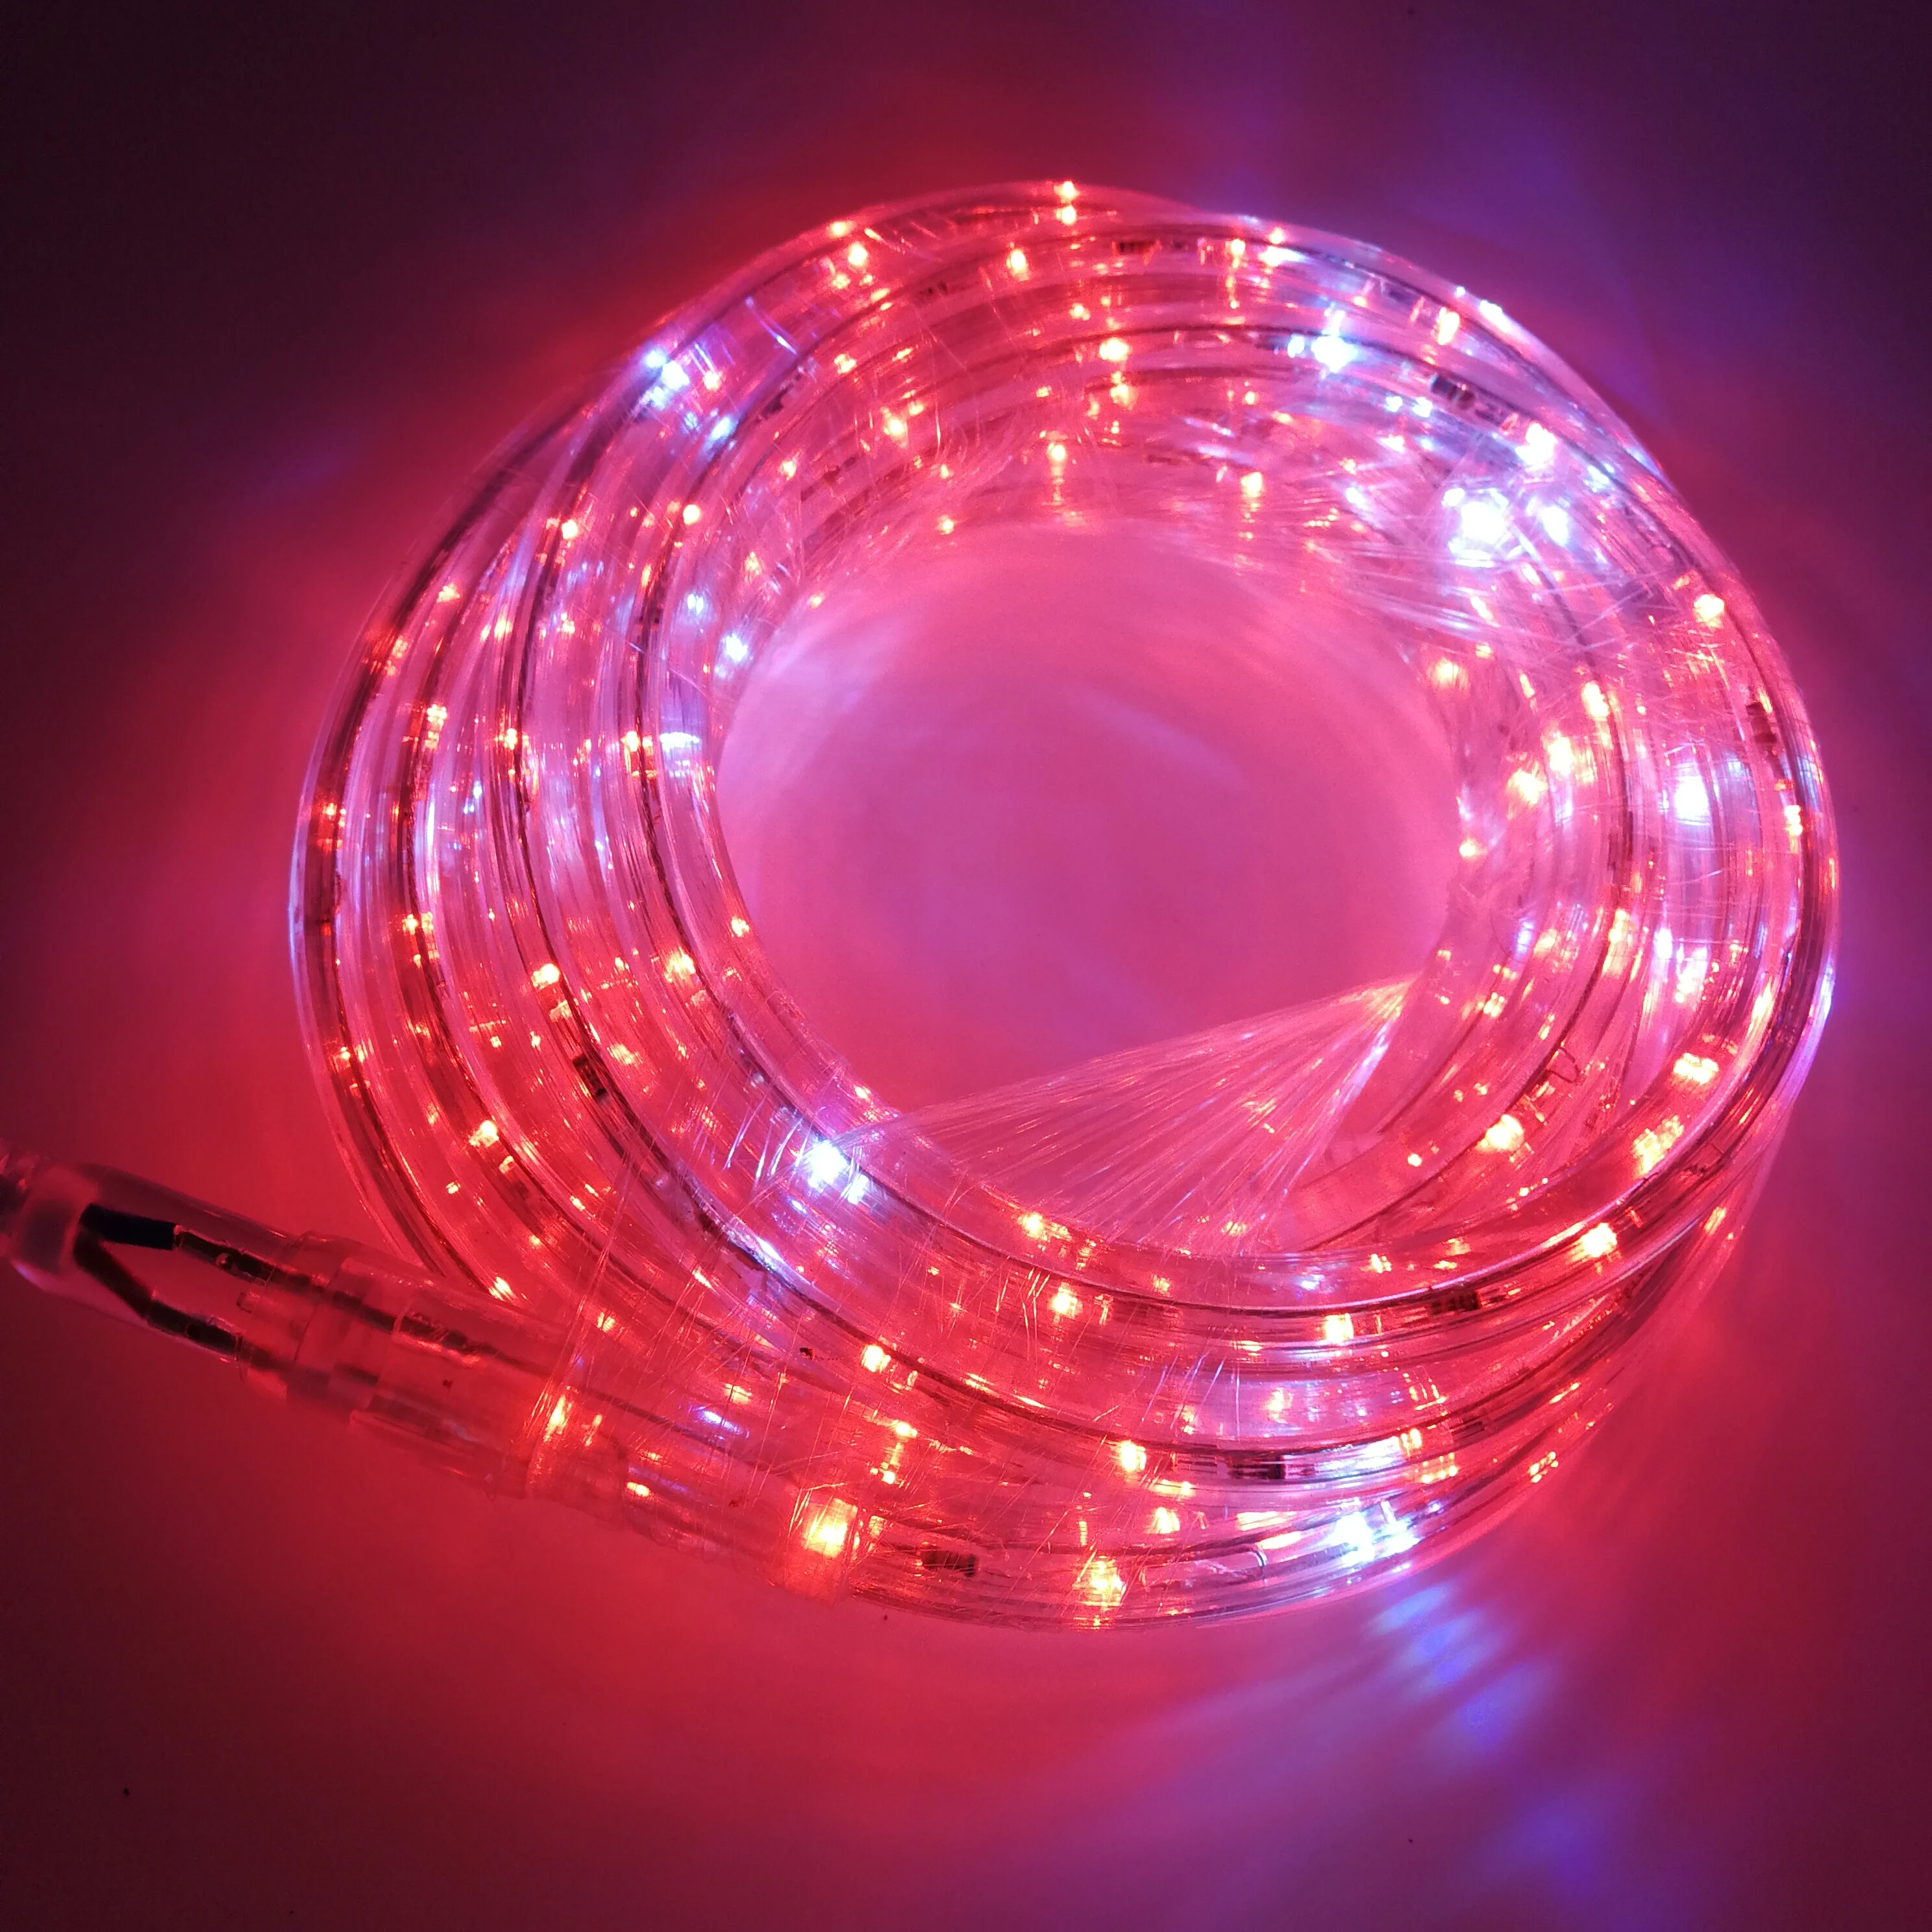 Outdoor Christmas time light 10m 100m color changing rope light warm white red green led rope lights